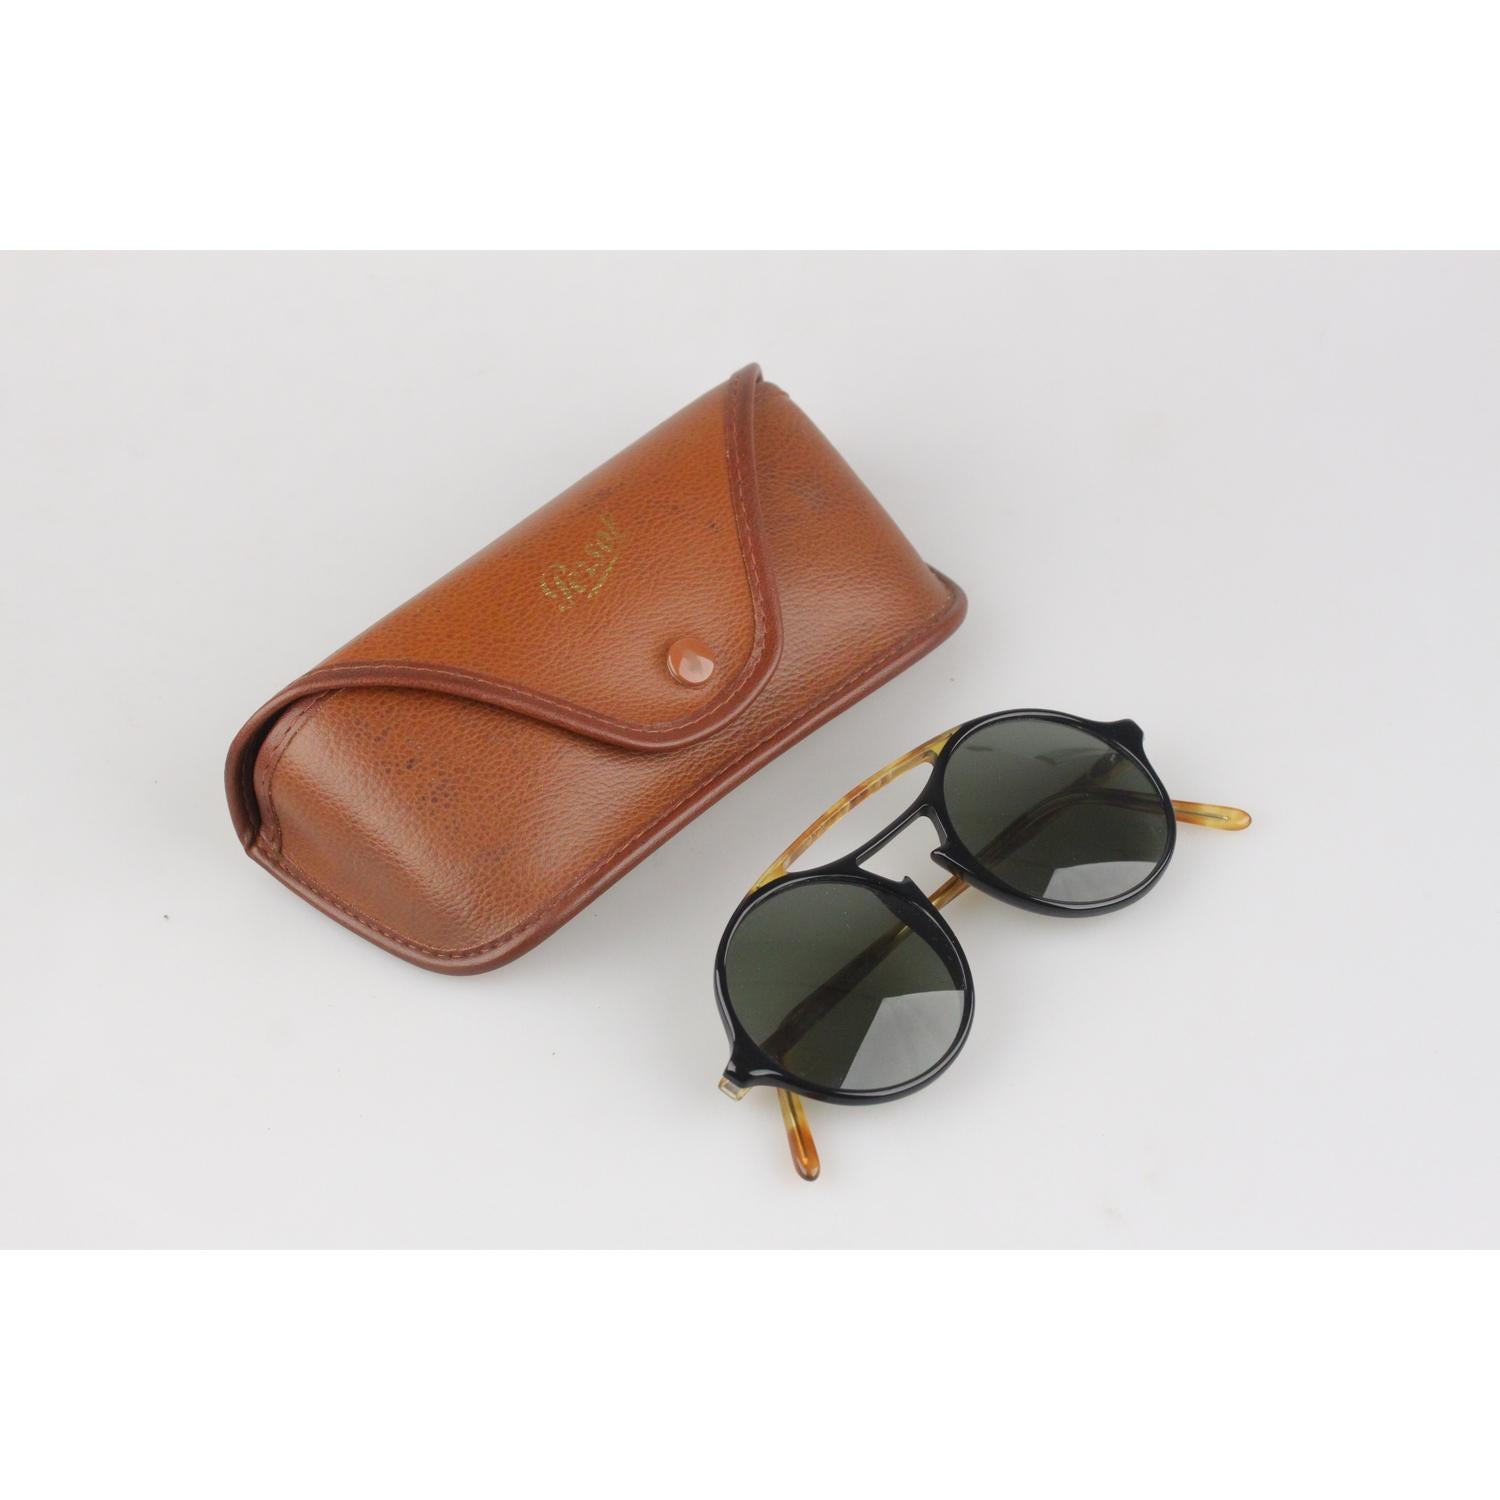 Persol original lenses, with original persol leather case

MATERIAL:
Acetate

COLOR:
Black

LENS COLOR:
Green

MODEL:
Round

GENDER:
Adult Unisex

SIZE:
Medium

CONDITION DETAILS:
EXCELLENT CONDITION: Gently Used! Very light imperceptible micro